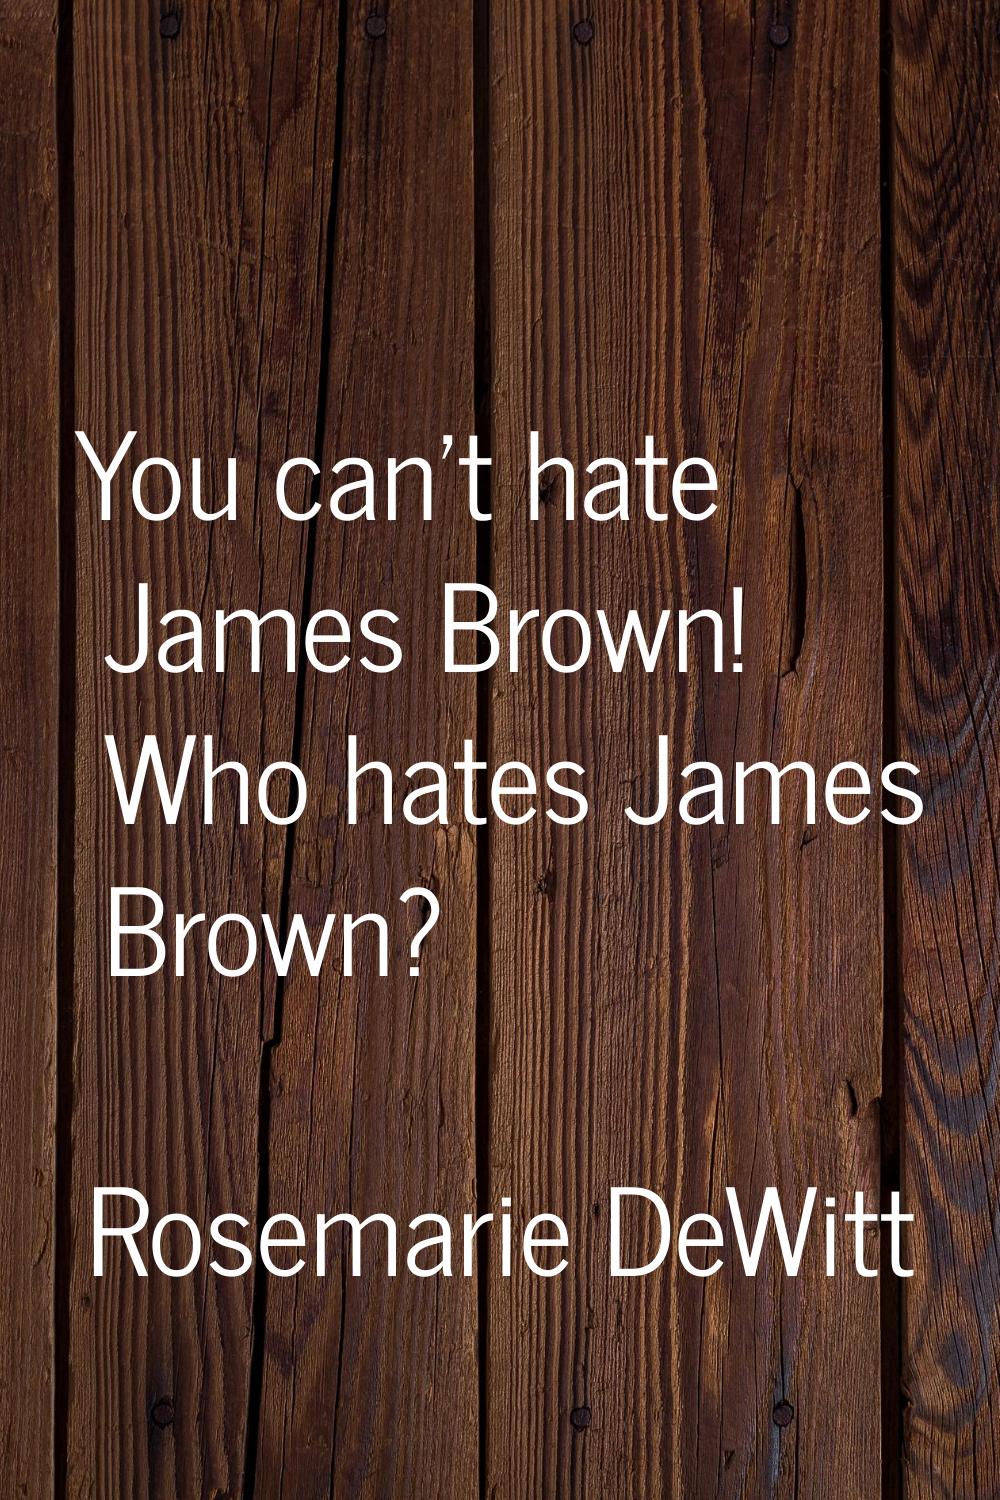 You can't hate James Brown! Who hates James Brown?